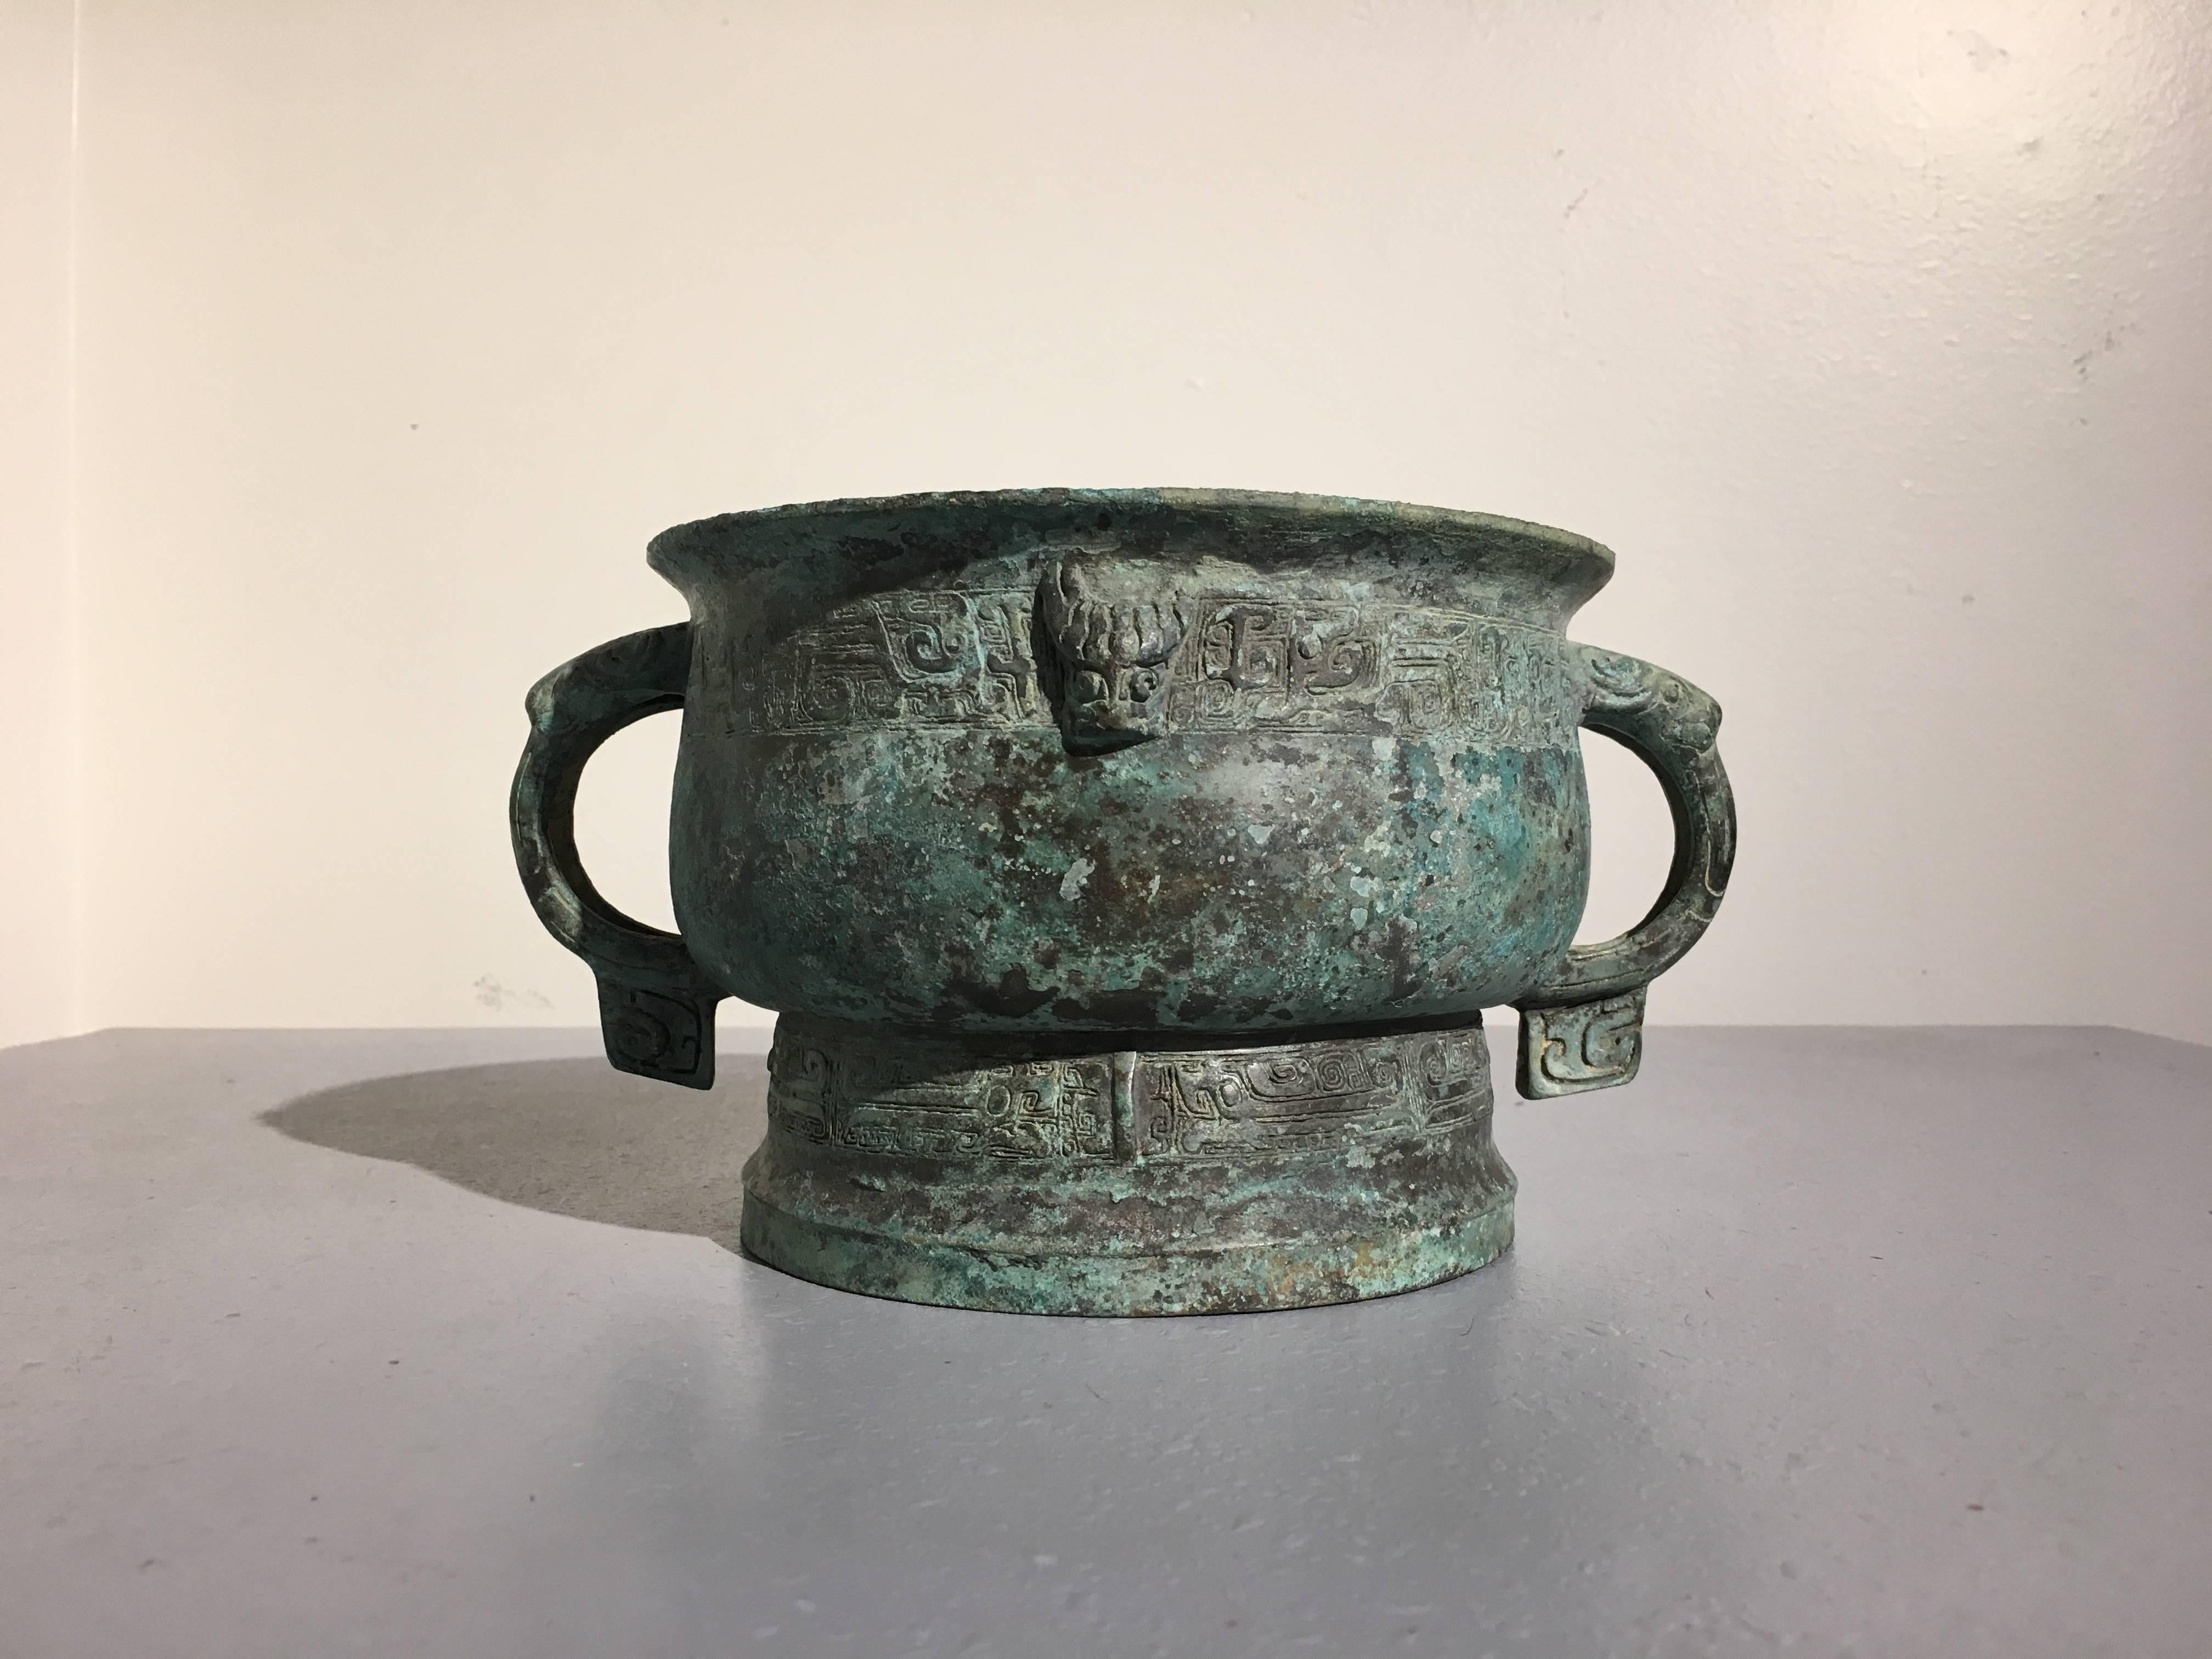 Archaic Chinese Bronze Ritual Vessel, Gui, Early Western Zhou, 11th century BCE In Good Condition For Sale In Austin, TX